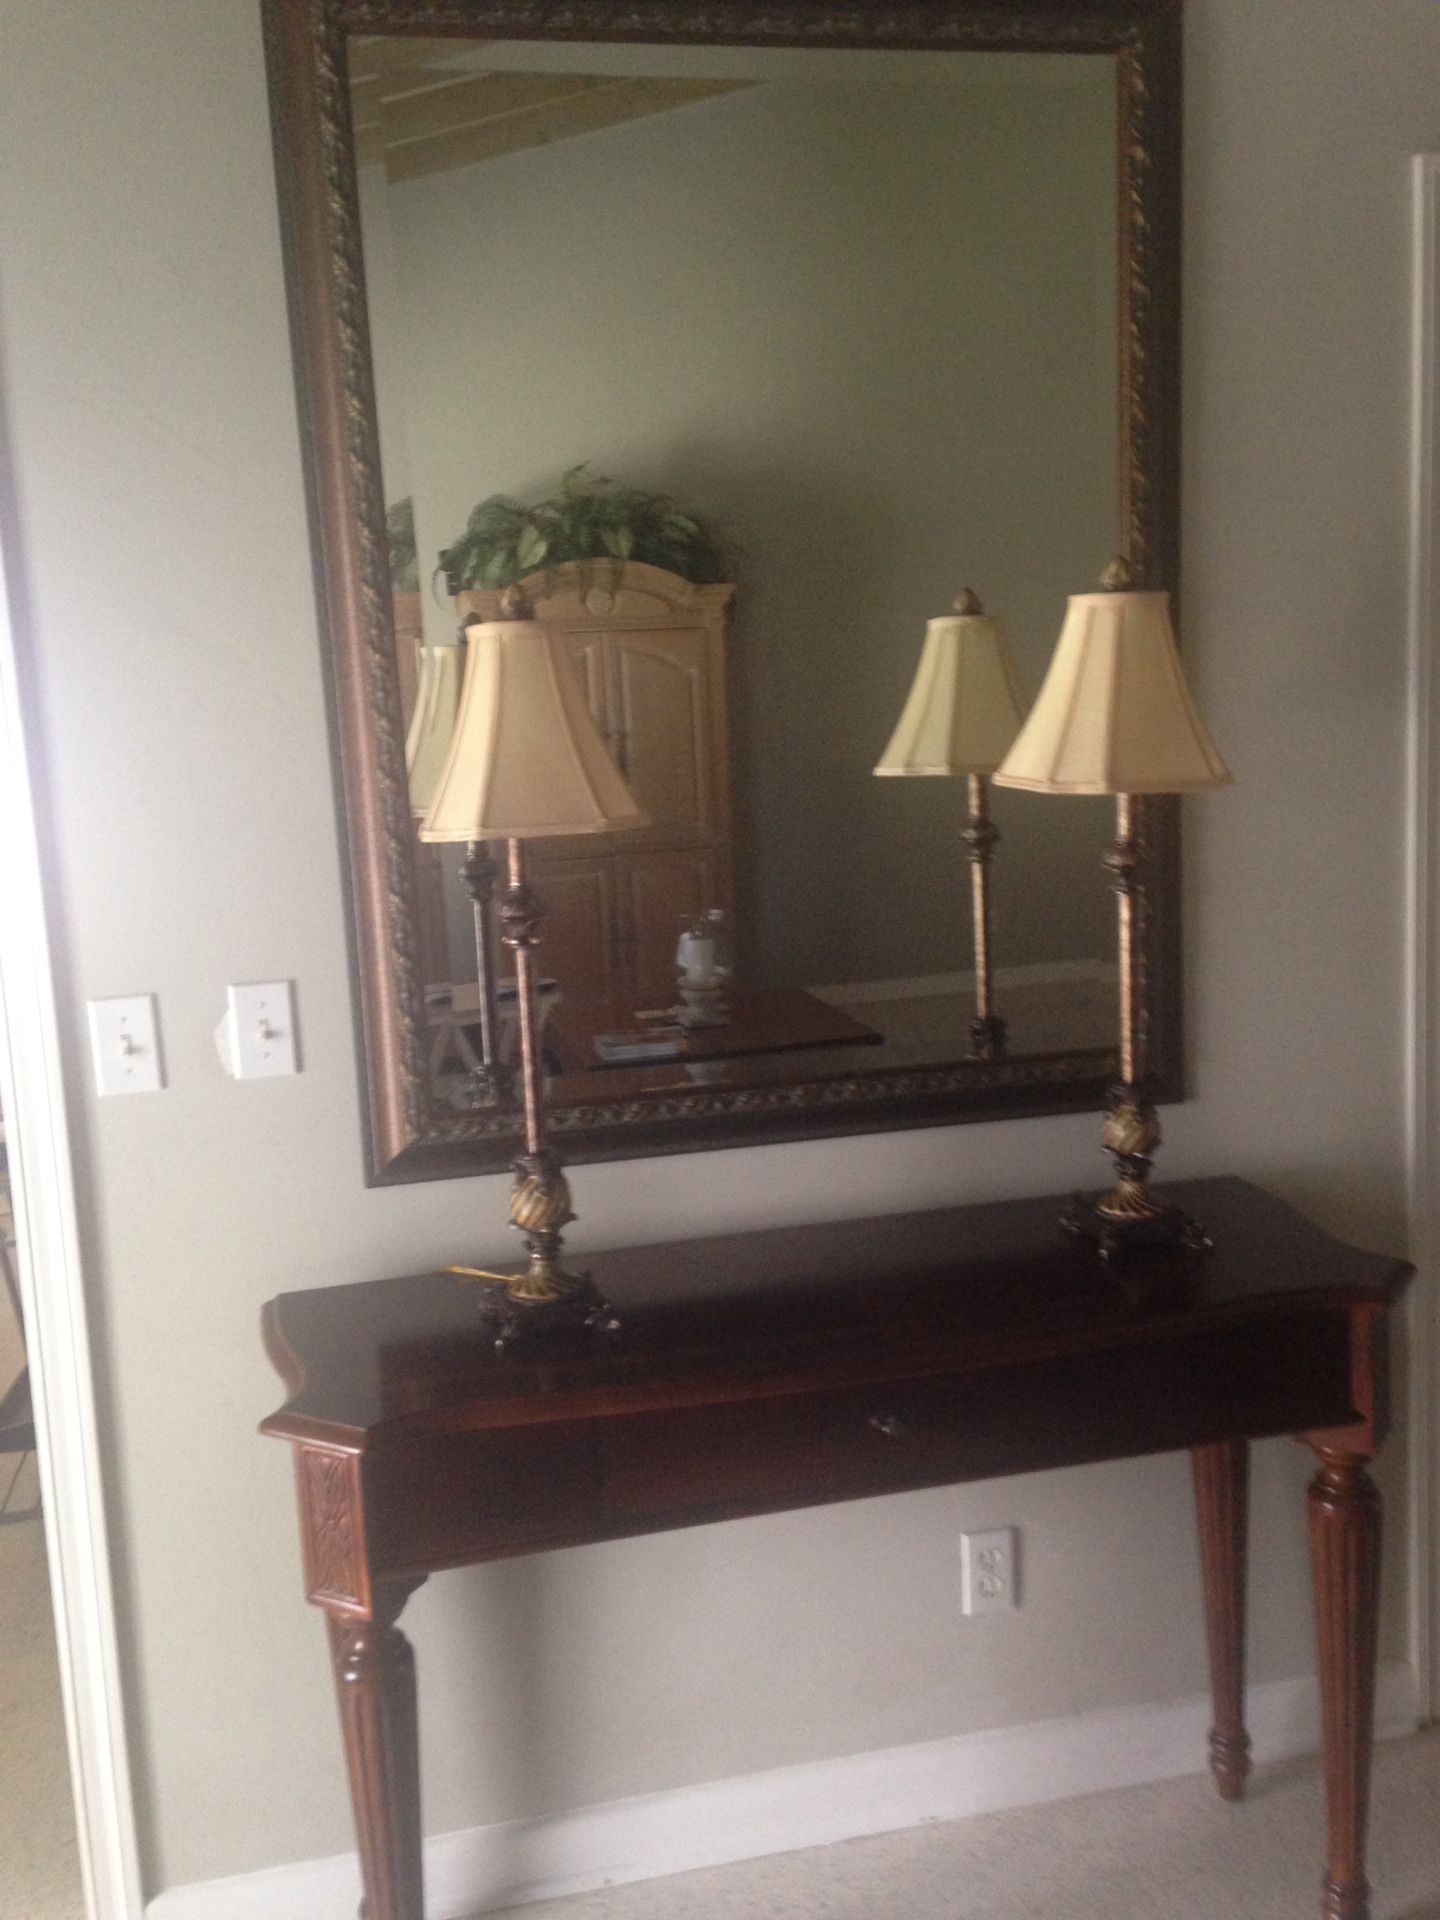 Haverty's Console Table/Desk